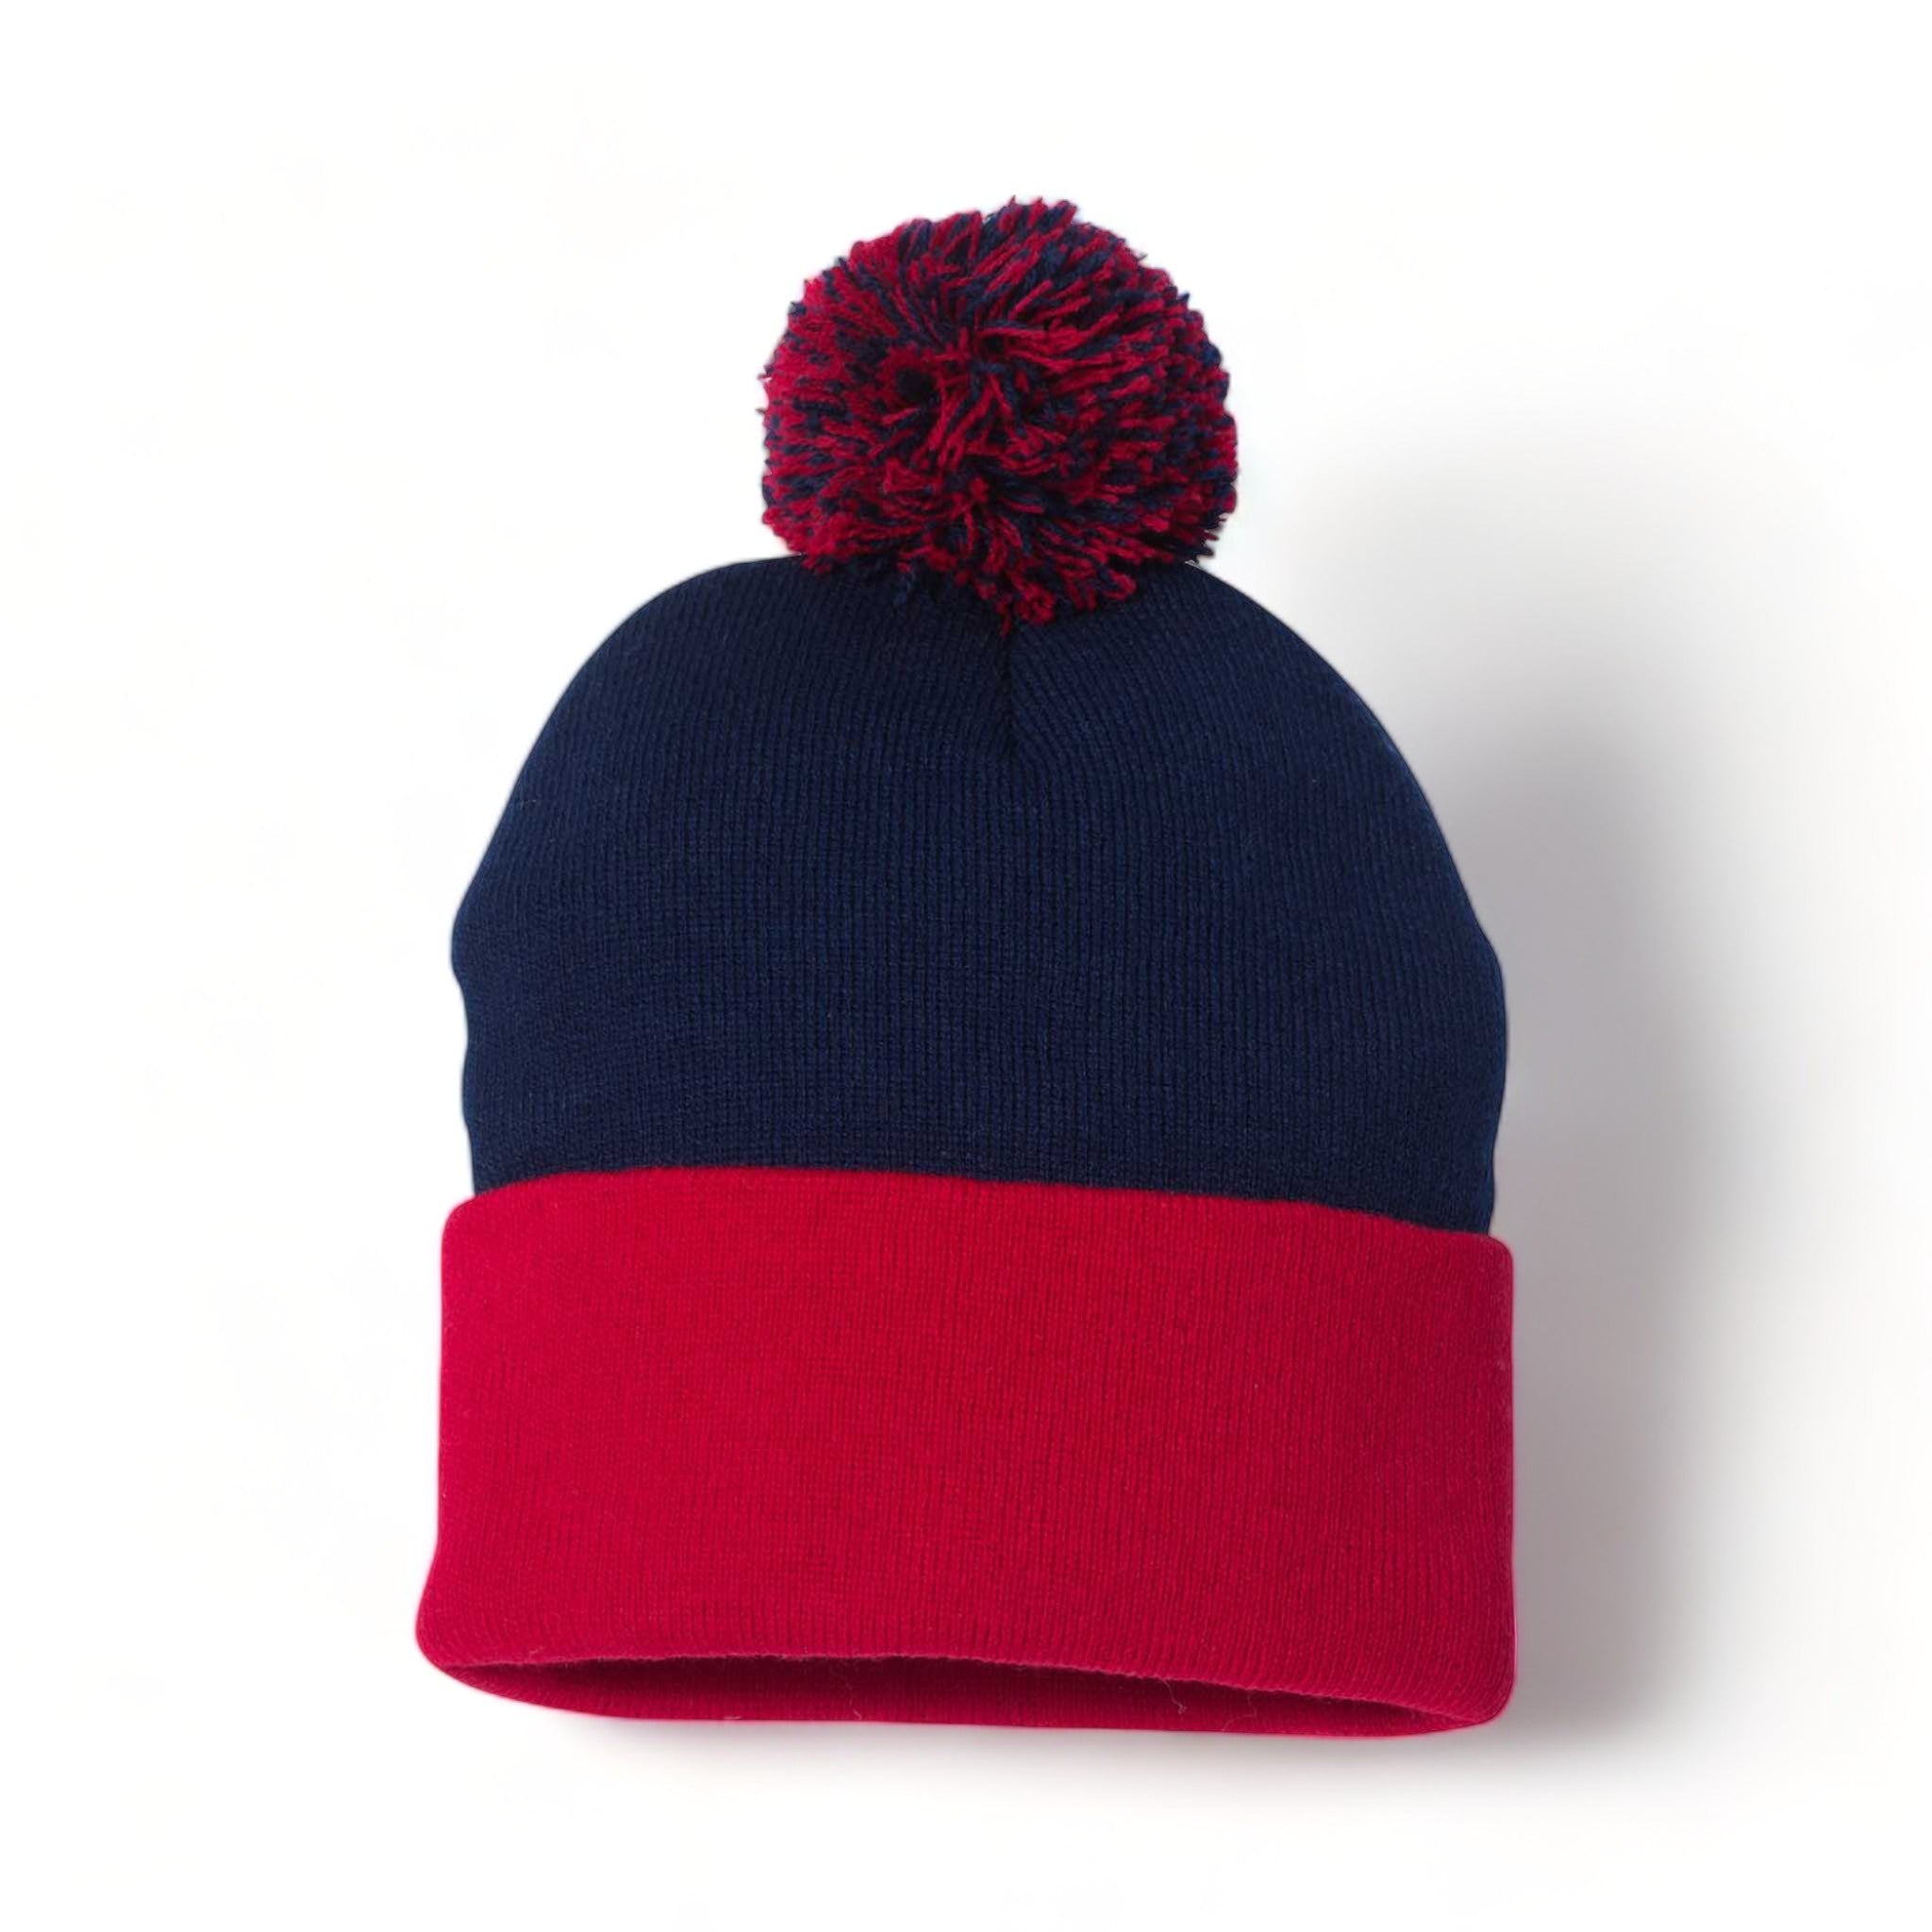 Sportsman SP15 custom beanie in navy and red